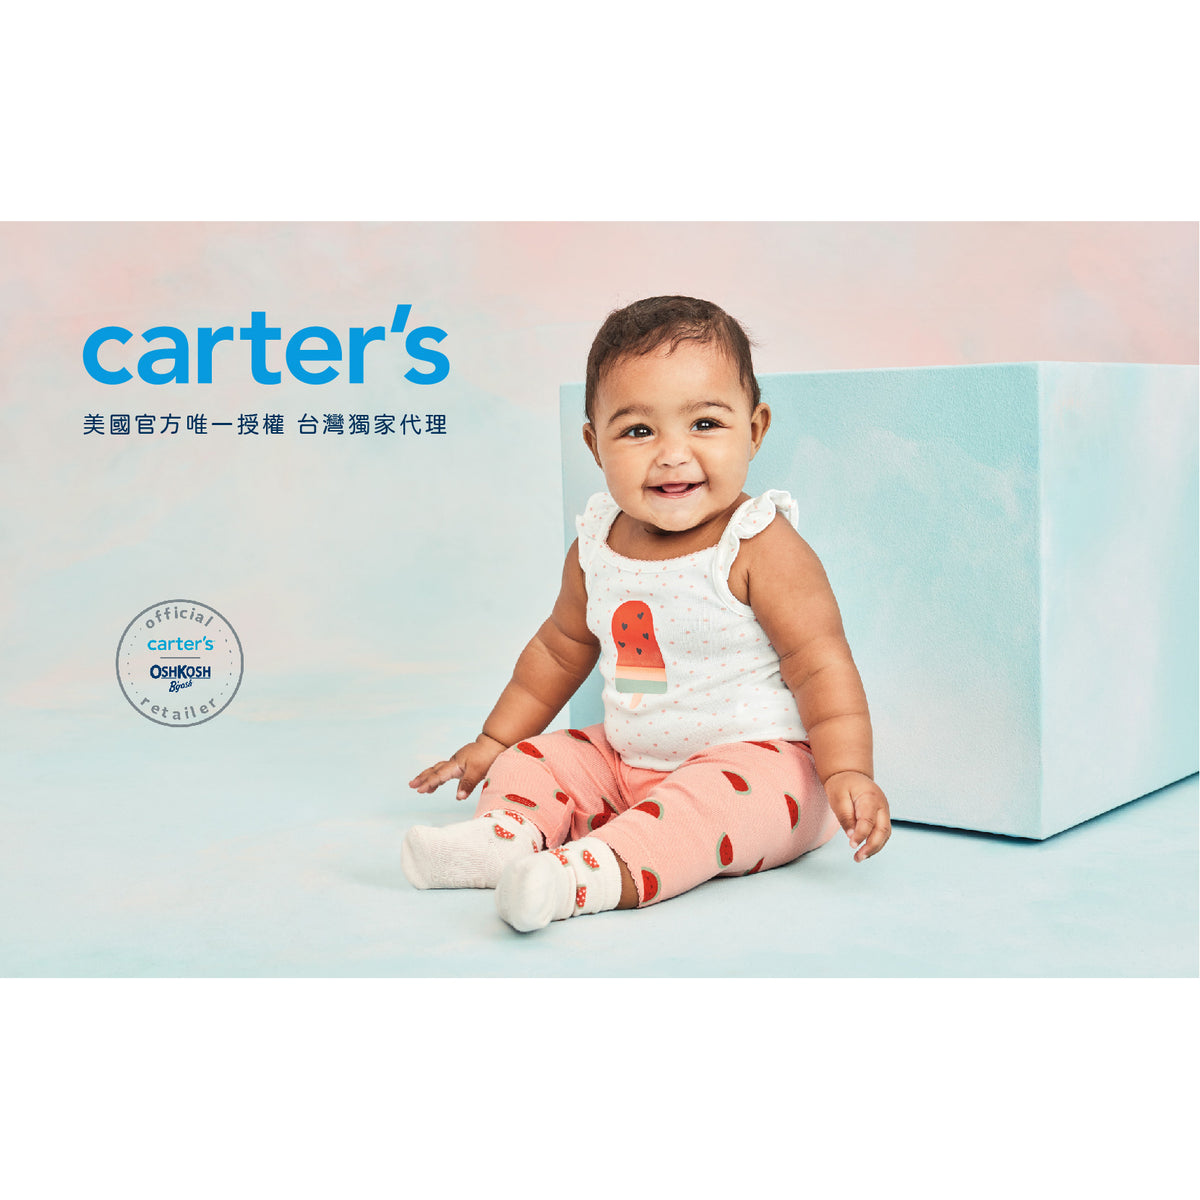 Carter's The early bird catches the worm 3-piece set (6M-24M)